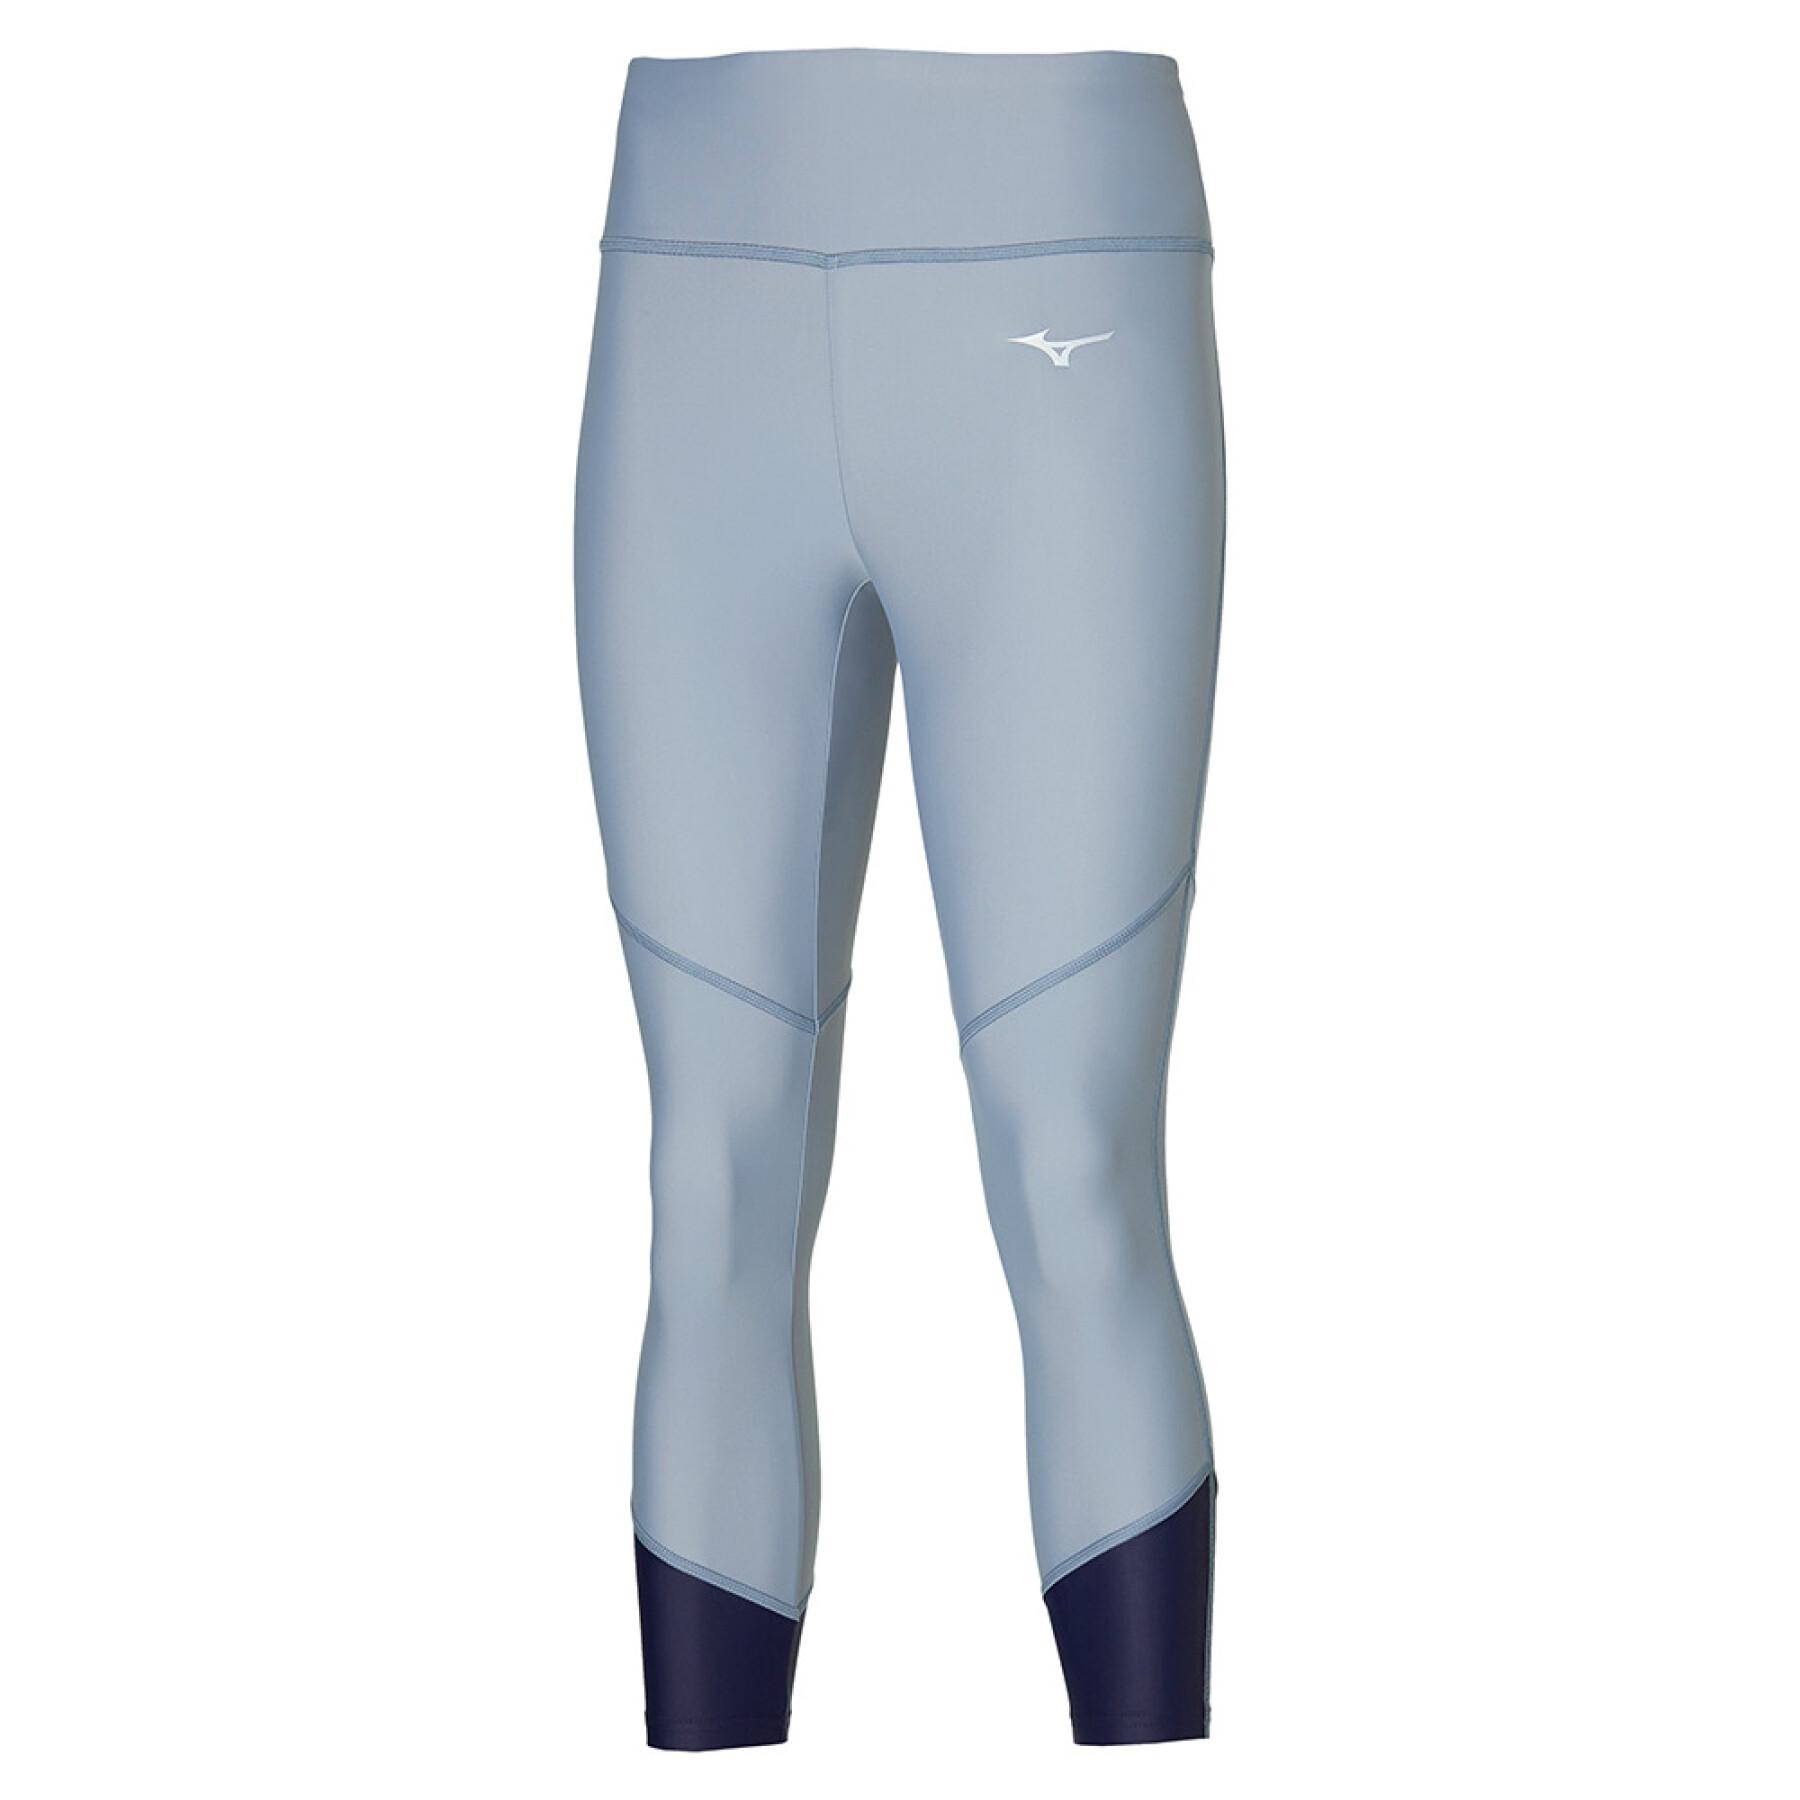 Women's Compression Running Tights - Rocket Active Gear